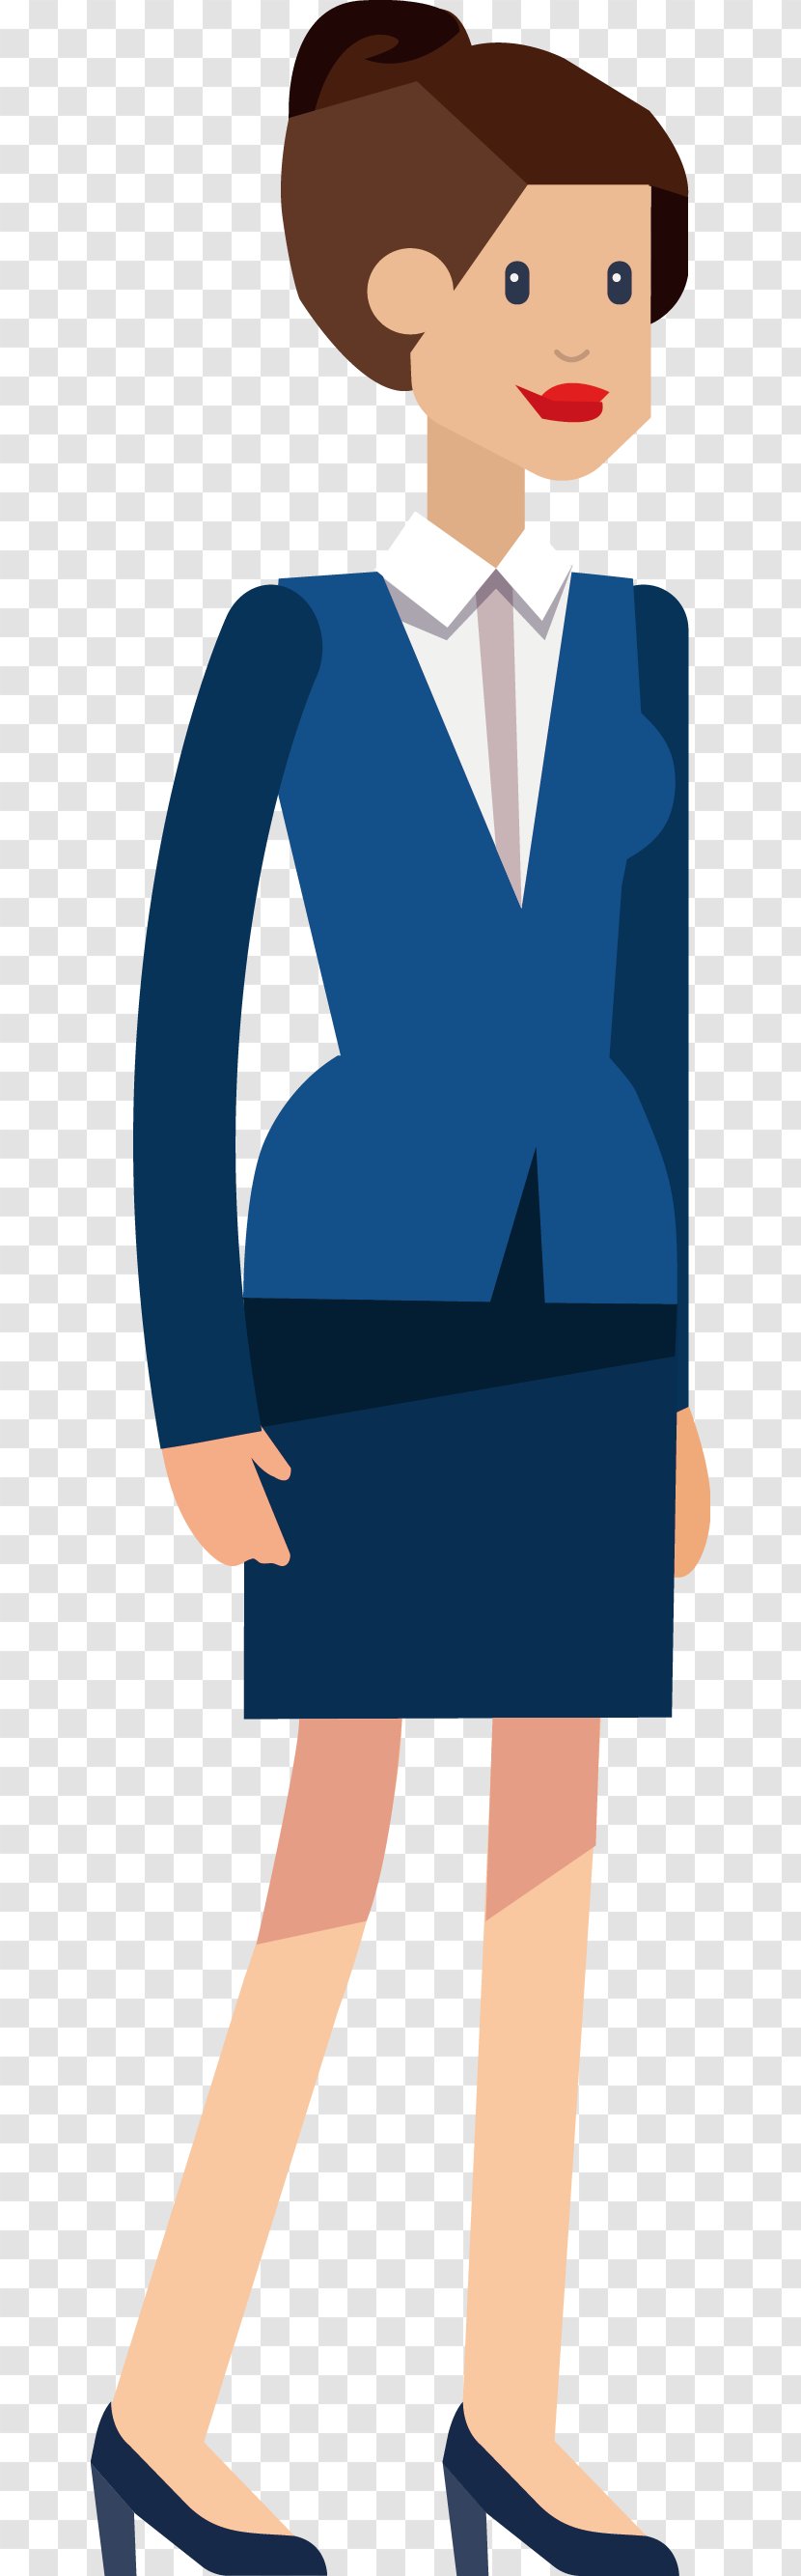 Businessperson Digital Marketing Executive Search Human Resources - Flower - Female Business People Vector Transparent PNG